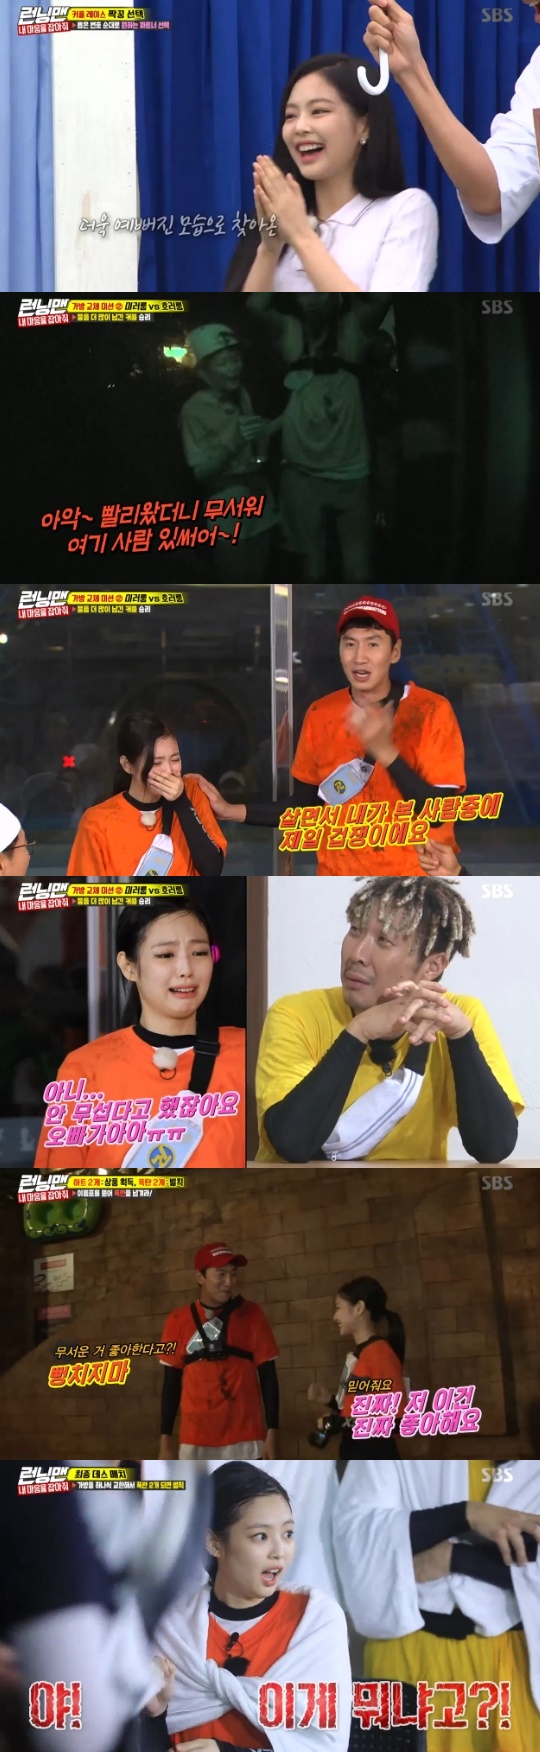 Running Man Black Pinks Jenny Kim and Lee Kwang-soo ended up with a final penalty.On SBS Good Sunday - Running Man broadcast on the 15th, Jenny Kim was drawn to tears in the horror room.On this day, Ji Seok-jin & Bora, Yoo Jae-Suk & Han Eun-jung, Lee Kwang-soo & Jenny Kim, Kim Jong Kook & Ji-soo, Yang Se-chan & Pyo Ye-jin, Haha & Jeon So-min, Song Ji-hyo &The second round Get Me is a mission where two couples choose one of the horror rooms and mirror rooms, respectively.Jenny Kim said she would go to the horror room at Hahas words that the horror room was not scary.Jenny Kim expressed confidence to Lee Kwang-soo, saying, If I do not have myself, I will go first.But Jenny Kim turned around and laughed at me as soon as she entered.Jenny Kim said, I said I did not surprise you. I said that I was not afraid of this.When Jenny Kim was so scared, Lee Kwang-soo, one of the cowards in Running Man, came out.Jenny Kim, who escaped safely, cried sadly, saying, I thought it would be okay to say that there was nothing surprising, but I was scared.Lee Kwang-soo teased the members, saying, I am the most coward I have ever seen in my life.When Jenny Kim said I told you Im not scared towards Haha, the arrow of criticism returned to Haha; however, Haha said, Its really so cute.I made this, he said proudly.Later on in the final race, Jenny Kim tried to ride a scary ride, but Lee Kwang-soo said: Dont bluff.You do not believe that it looks a little bit like a bluff style when I look at it, Jenny Kim emphasized. This is real. It was real to ride well, but when Race started, Jenny Kim laughed tiredly, saying in 30 seconds, I dont have physical strength, Im weak on the stairs.Jenny Kim & Lee Kwang-soo will face Pyo Ye-jin & Yang Se-chan in Death Match.The last thing is not going to take, its not the top, Im sure, said Jenny Kim, who was a slam-banger throughout the race, opting for Pyo Ye-jins bag.But the bomb came out, and the two were given final penalties.Photo = SBS Broadcasting Screen